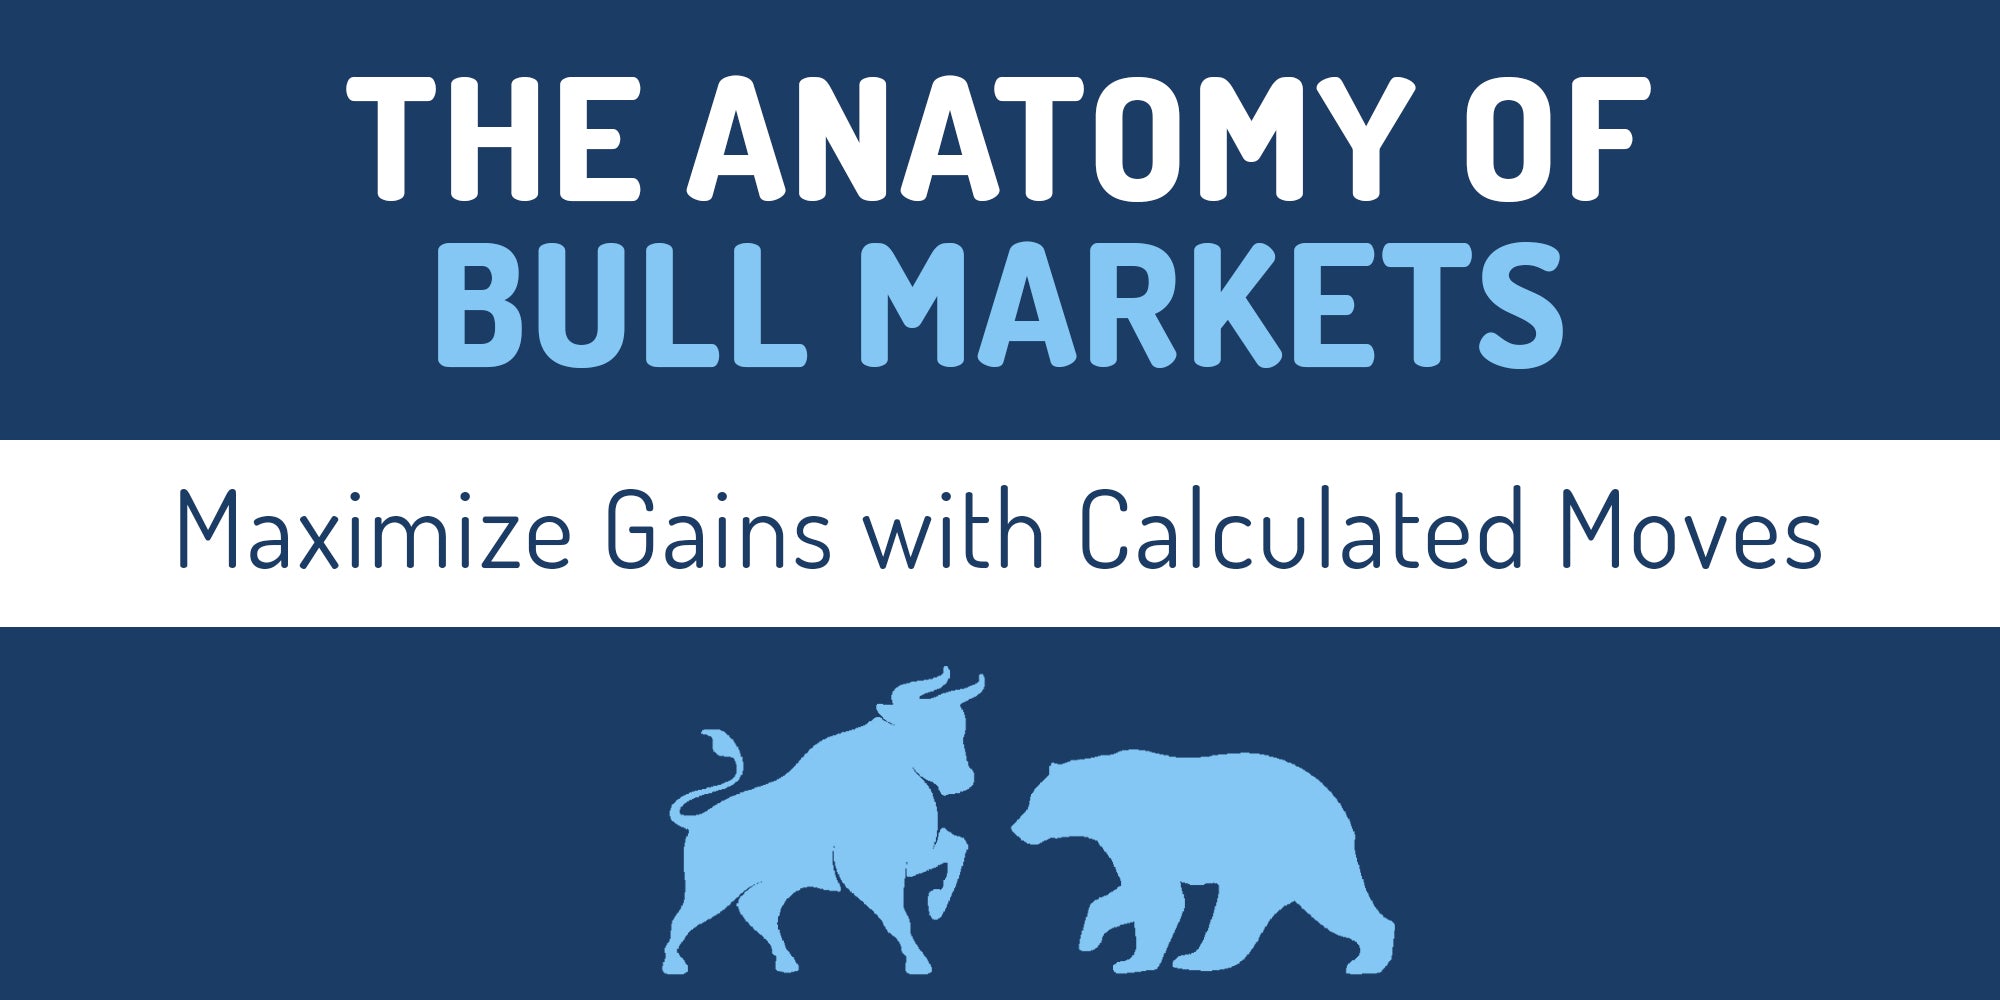 Designing Your Bull Markets Playbook